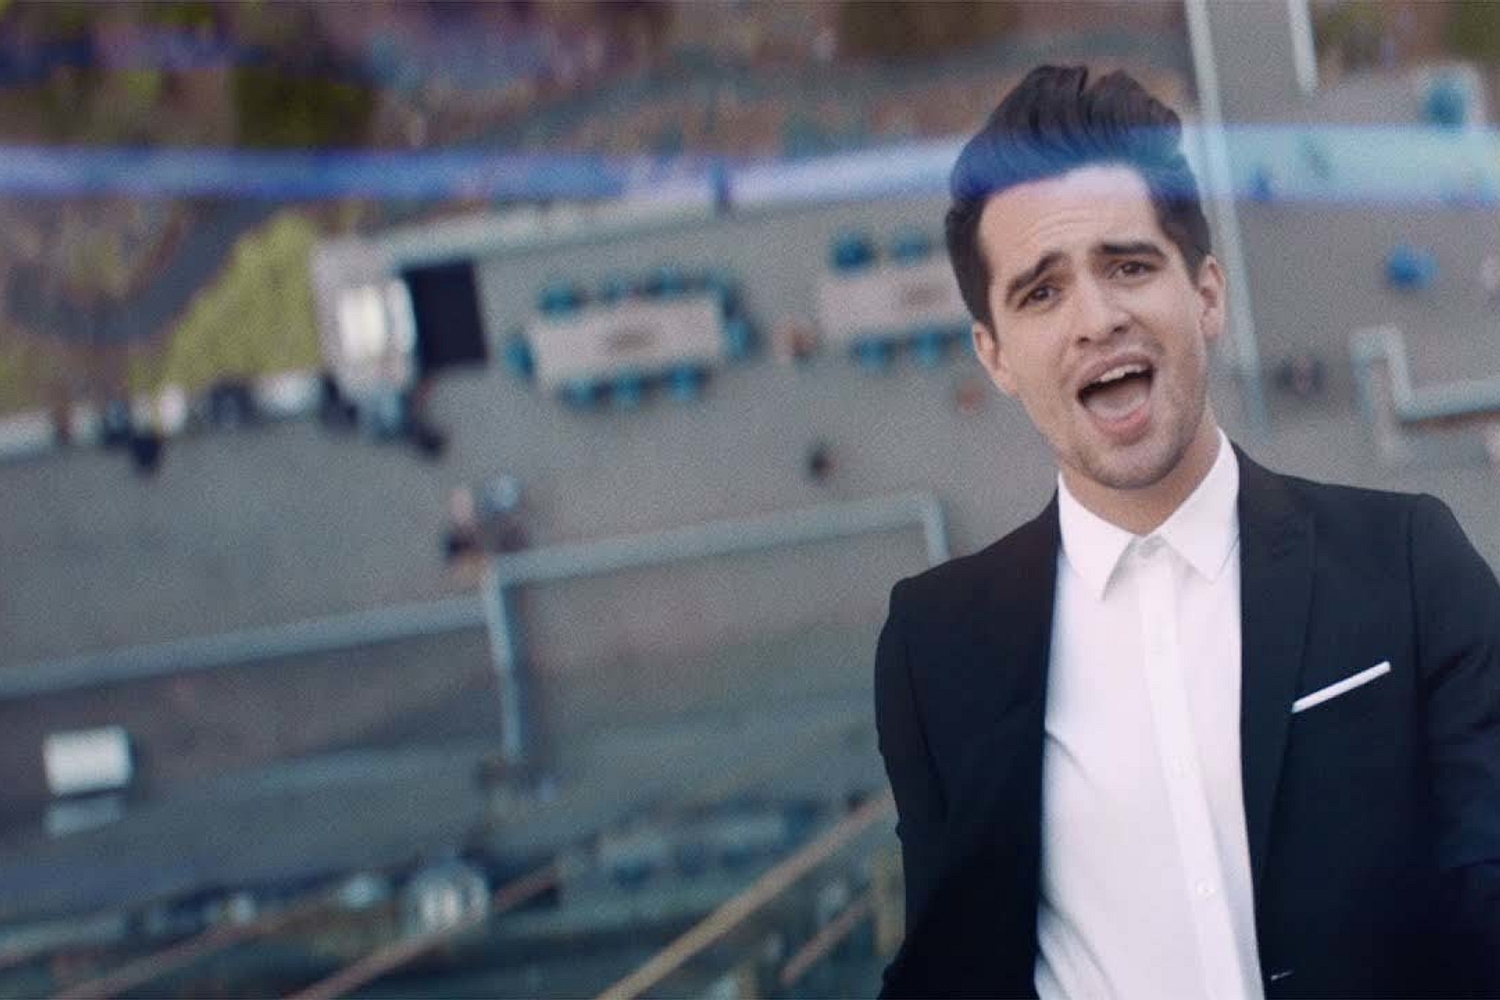 Brendon Urie scales a skyscraper in Panic! At The Disco’s new video for ‘High Hopes’